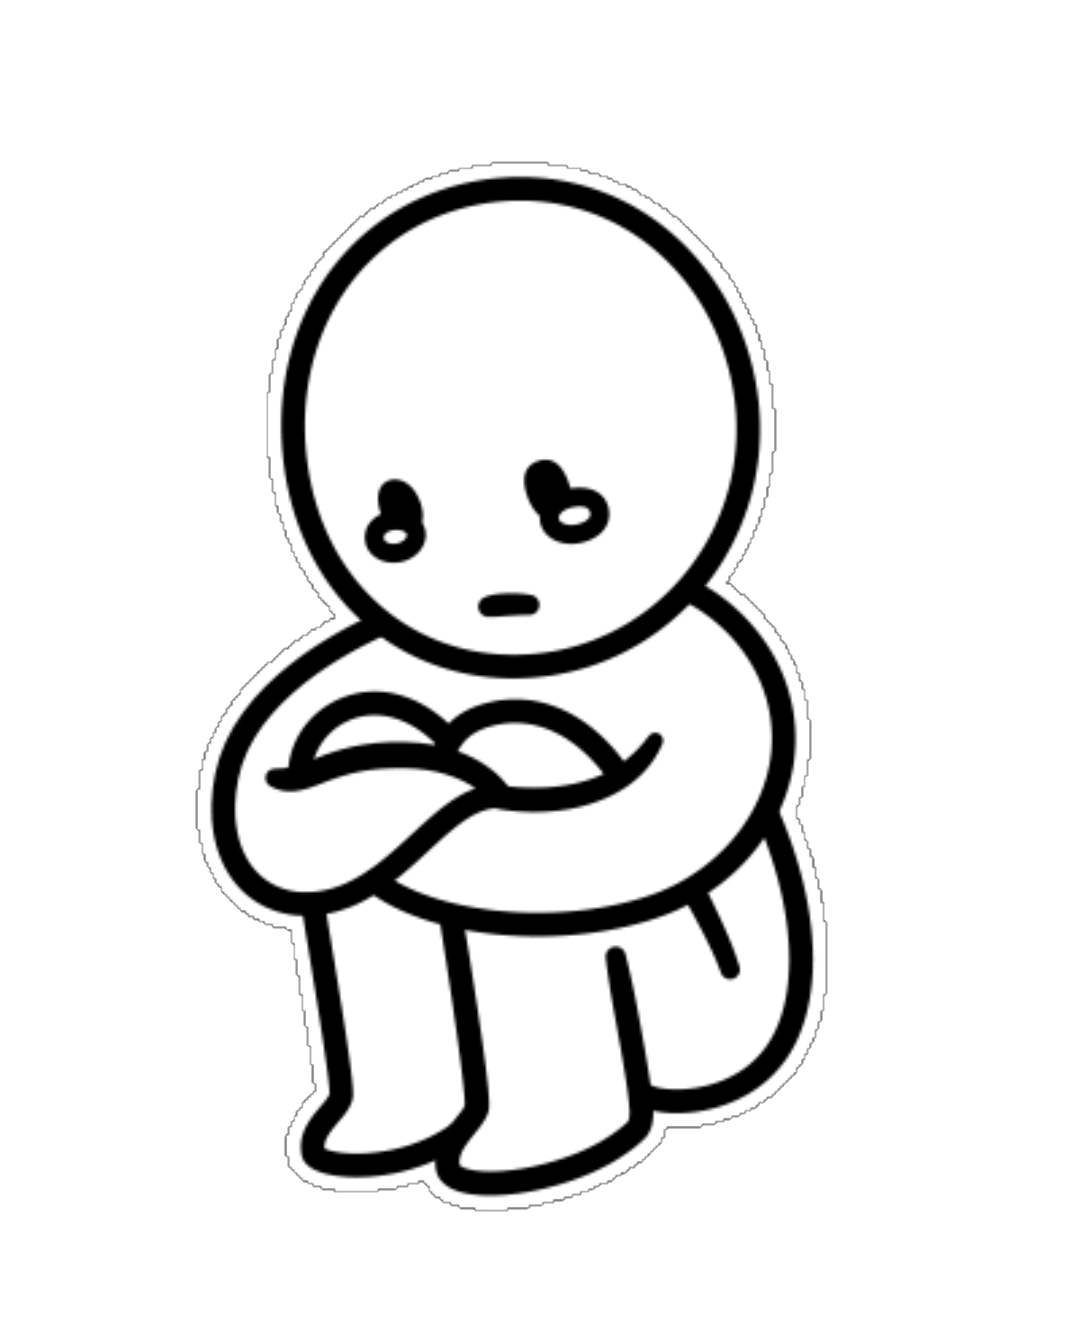 Sad Drawings PNG Background